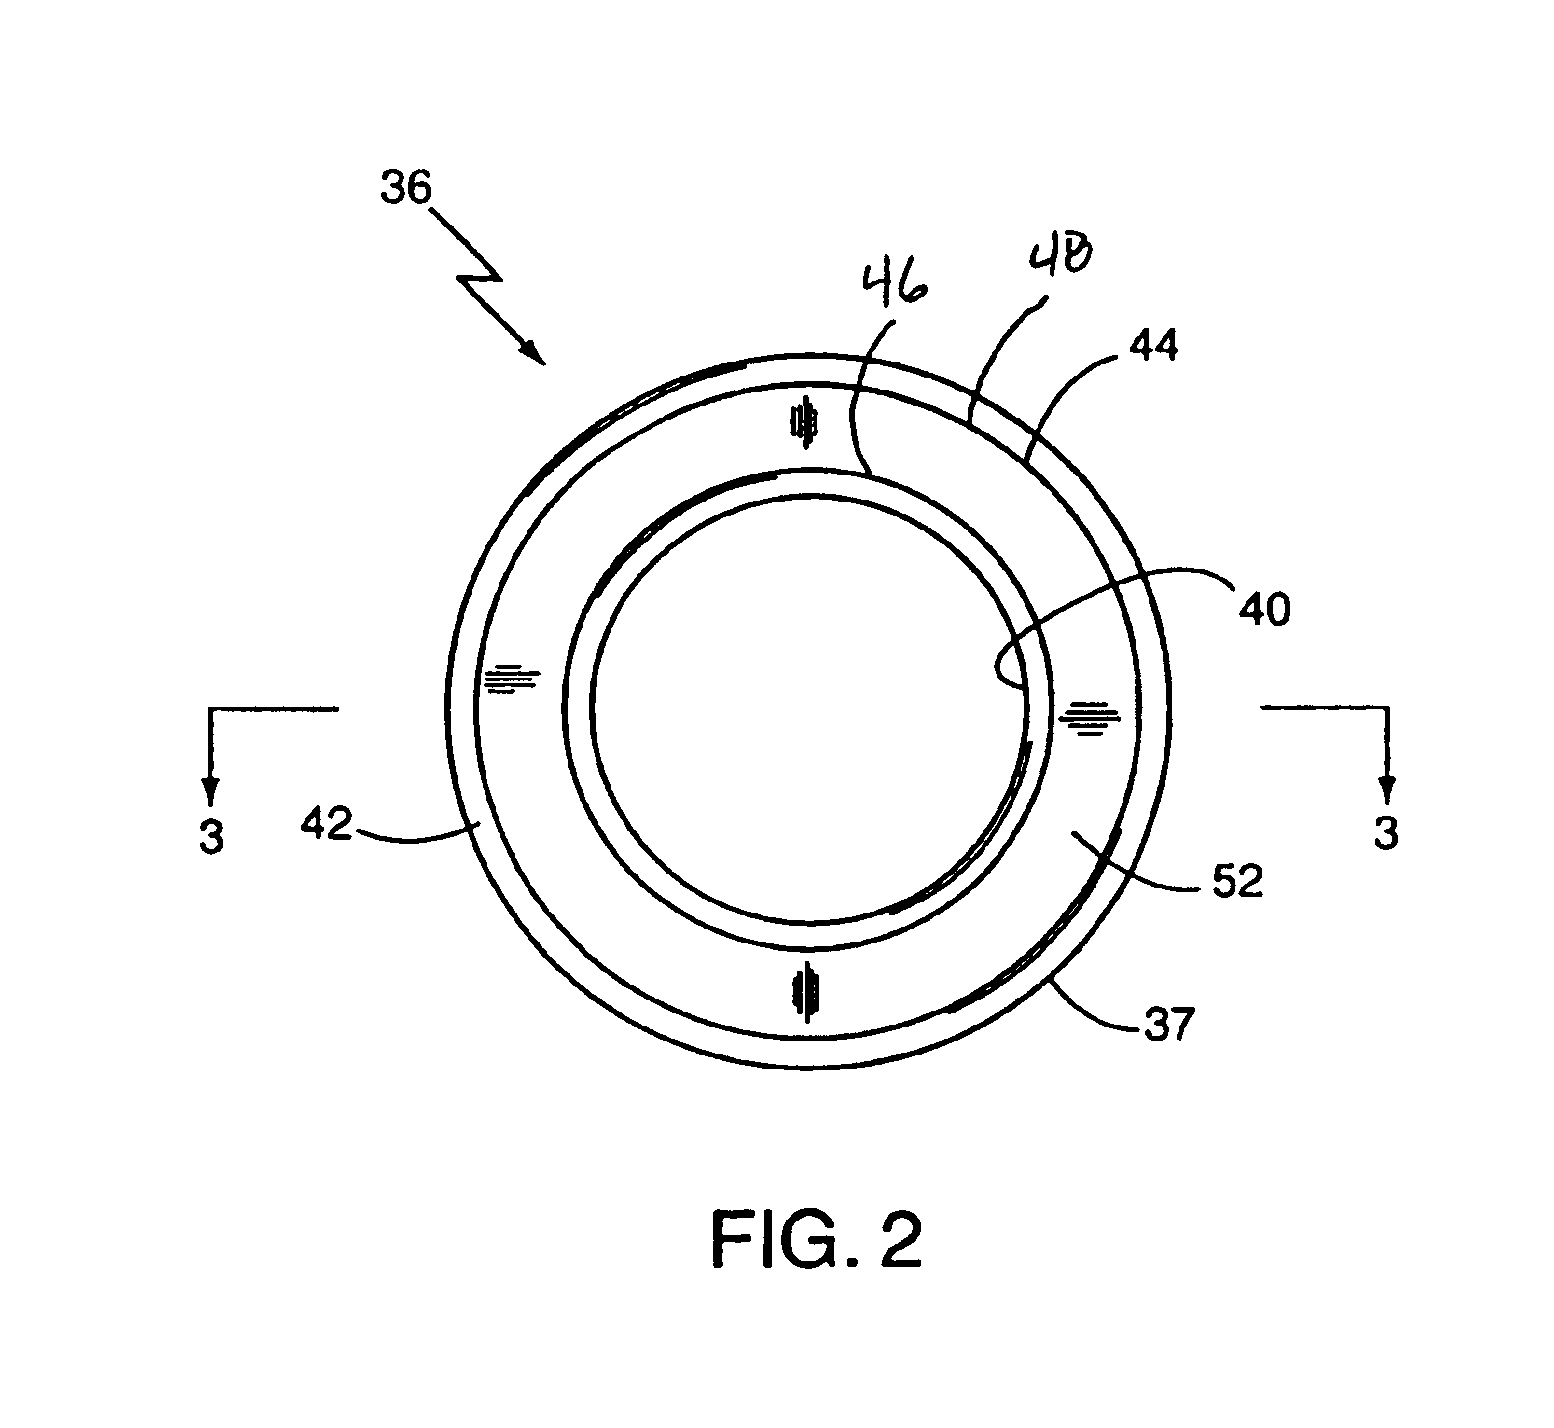 Valve seal assembly for rotary valve engine